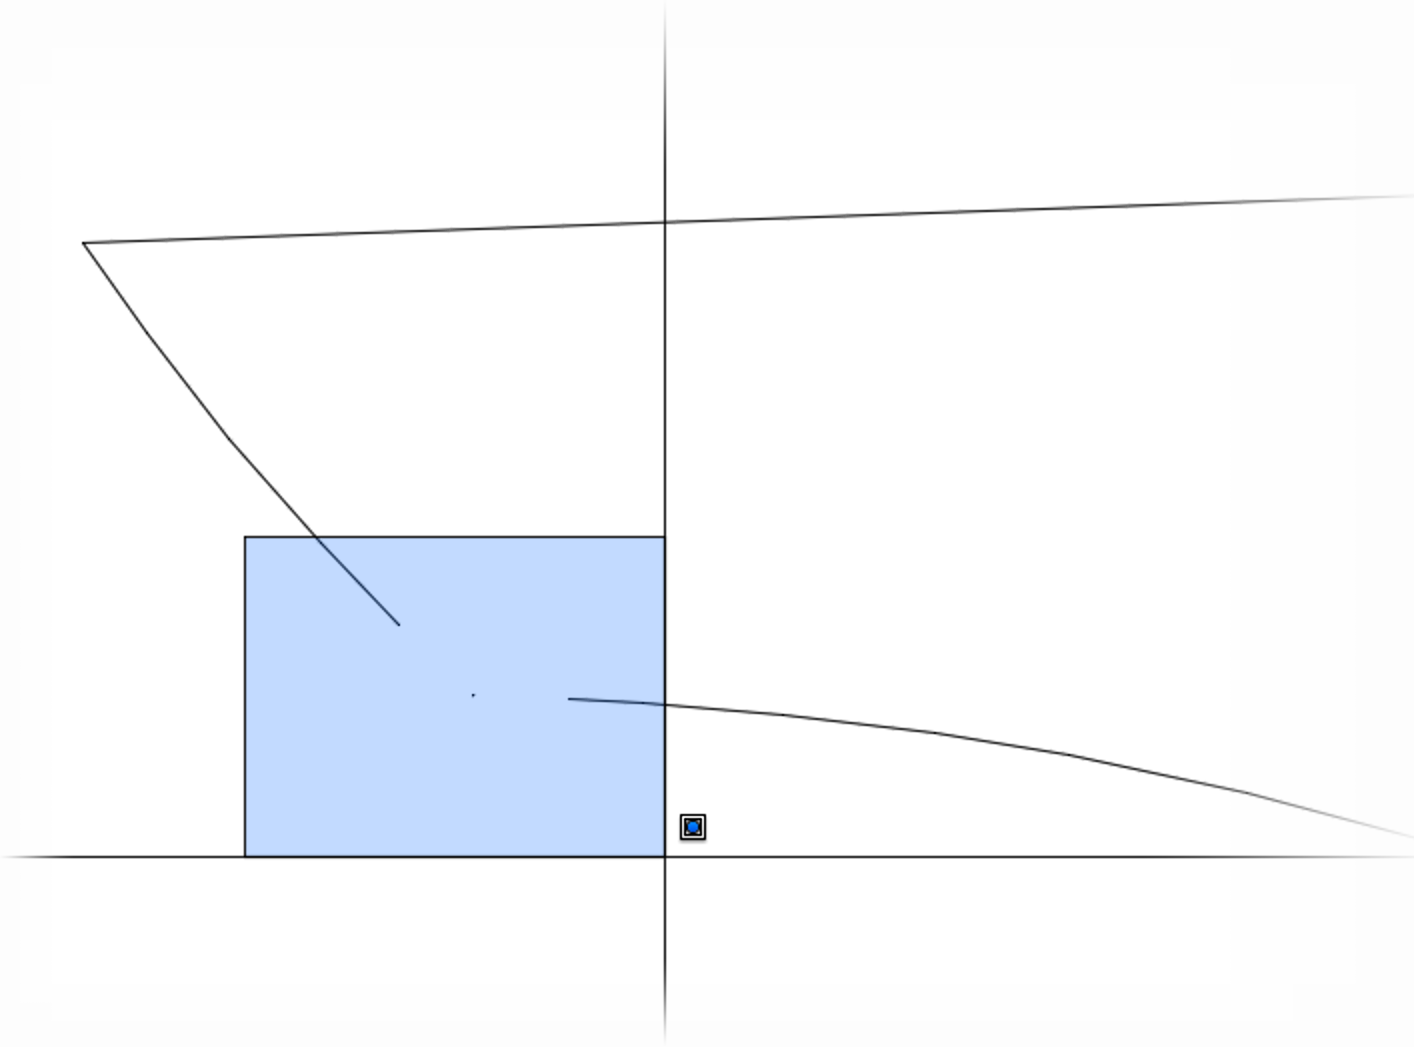 Deleting segments in the polyline boundary to locate the problem area